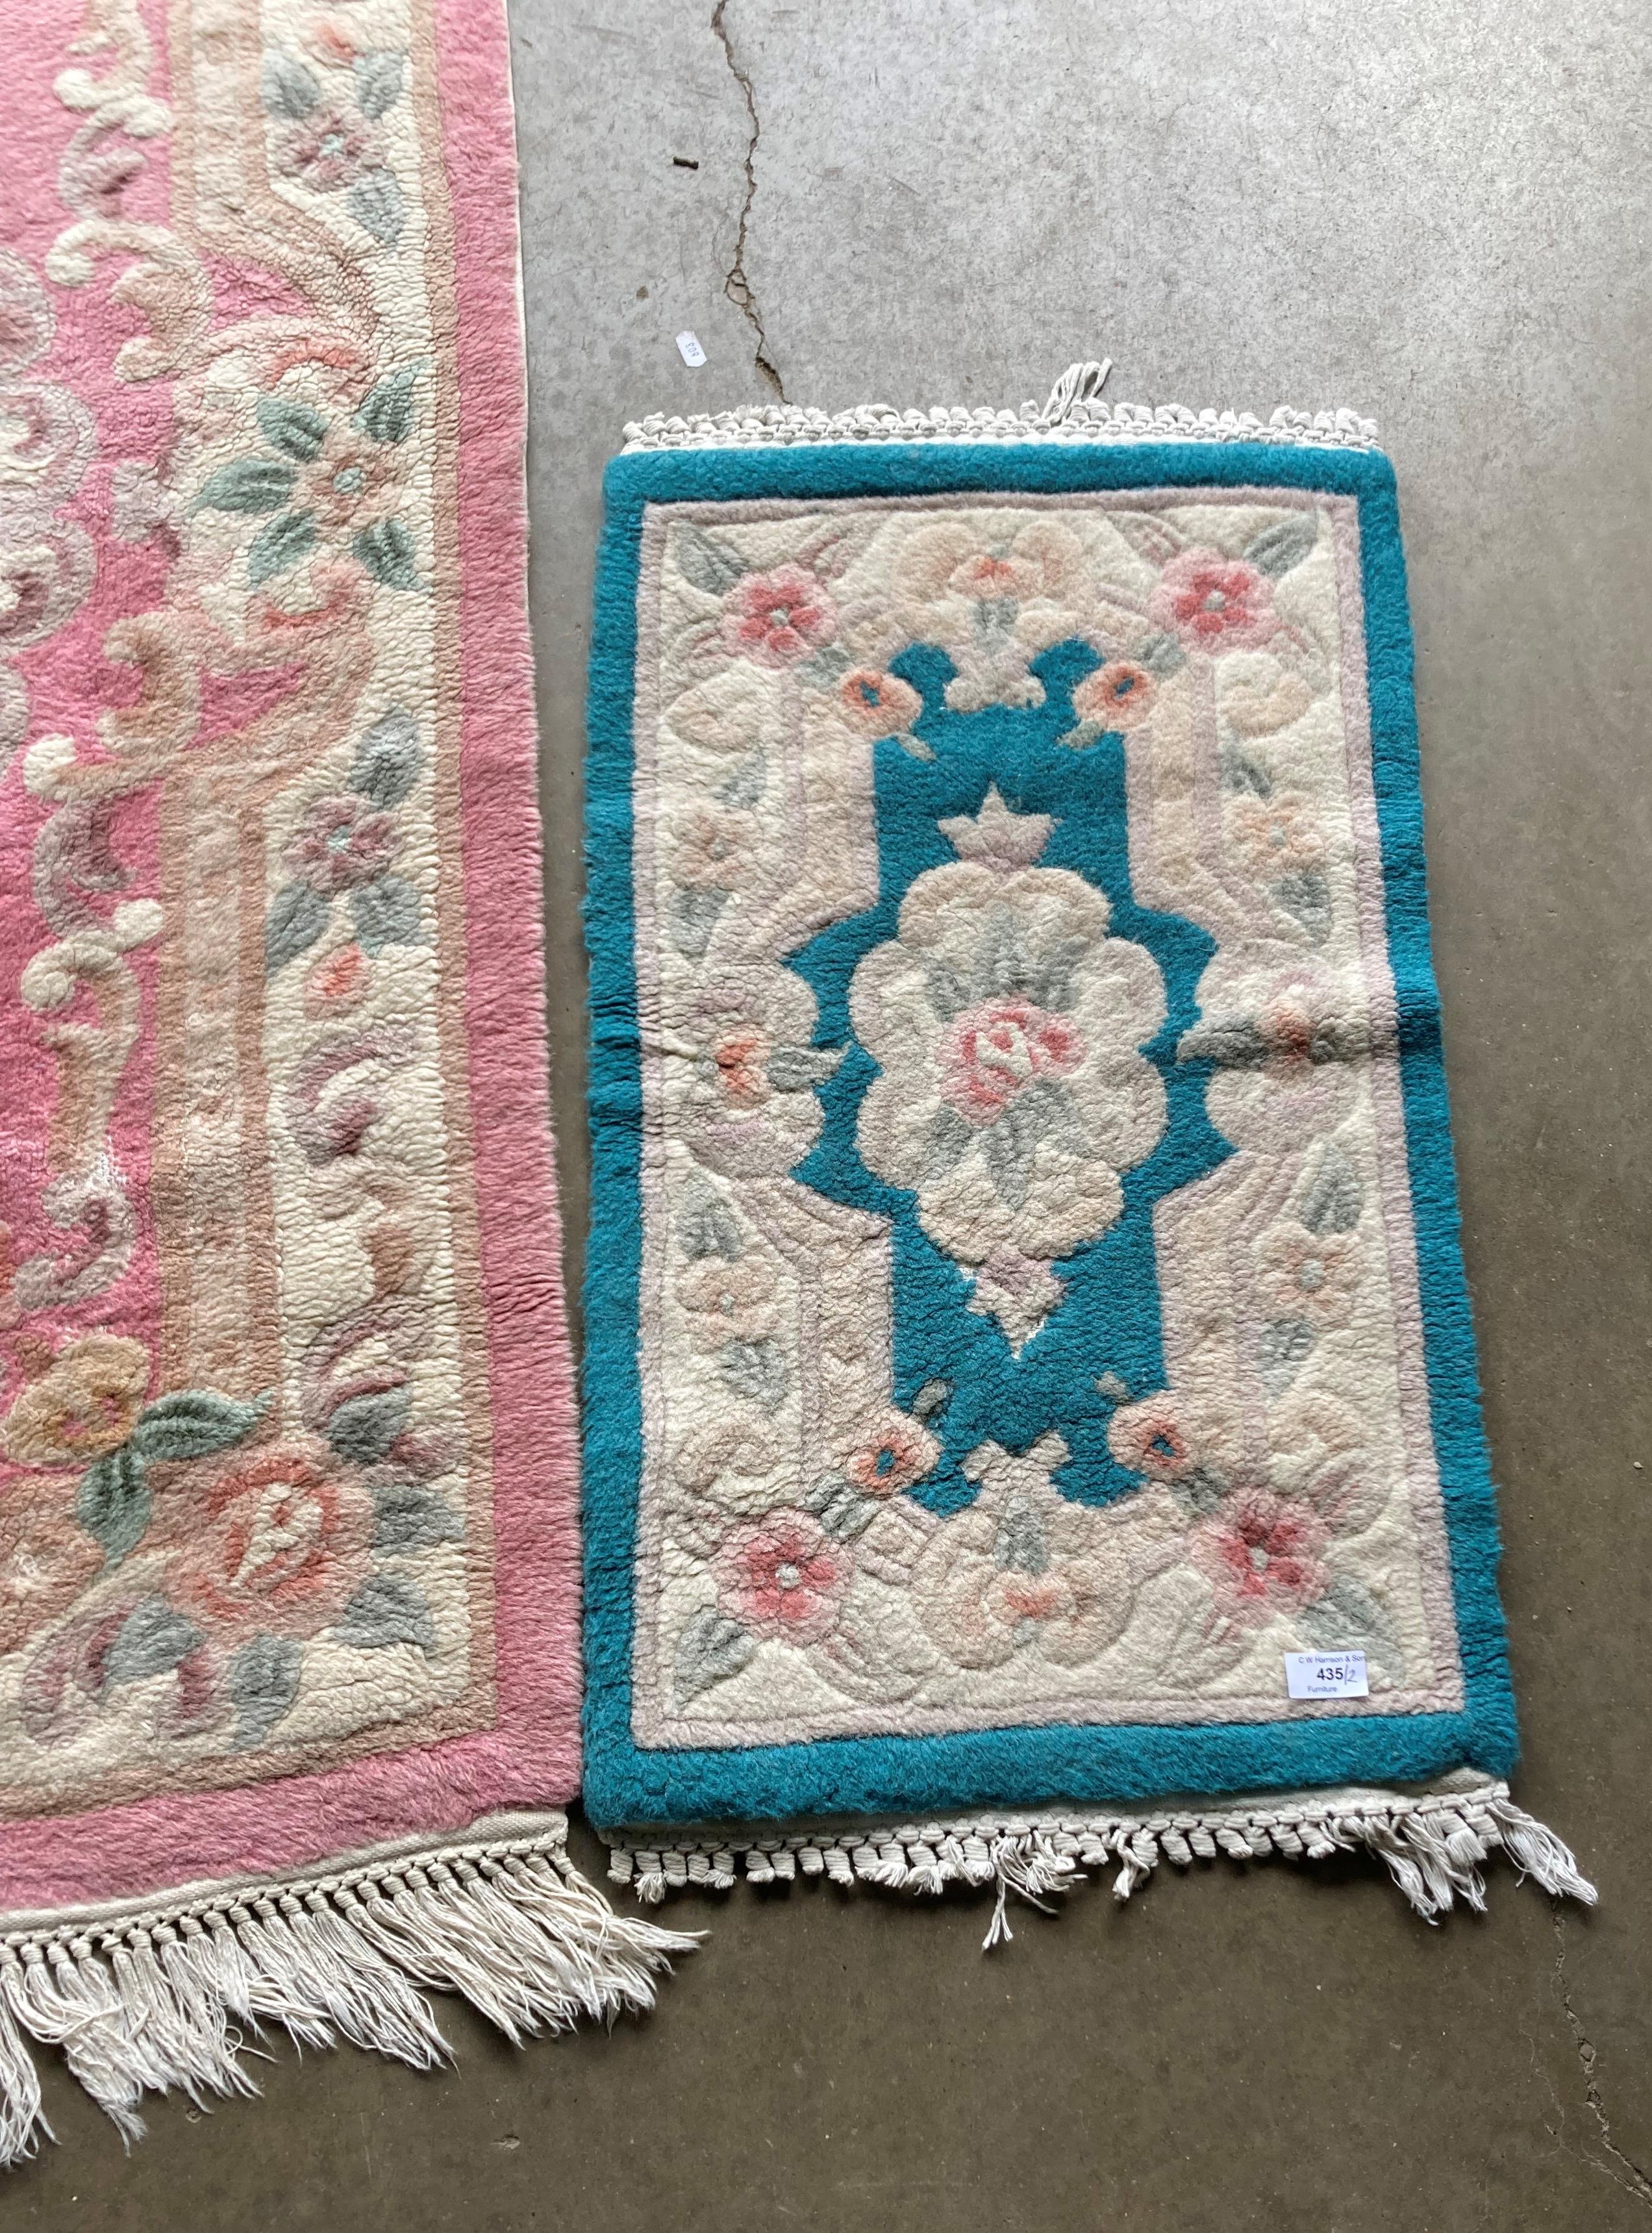 Two Chinese-style rugs - pink pattern (150 x 75cm) and blue pattern (75 x 45cm) (saleroom location: - Image 3 of 4